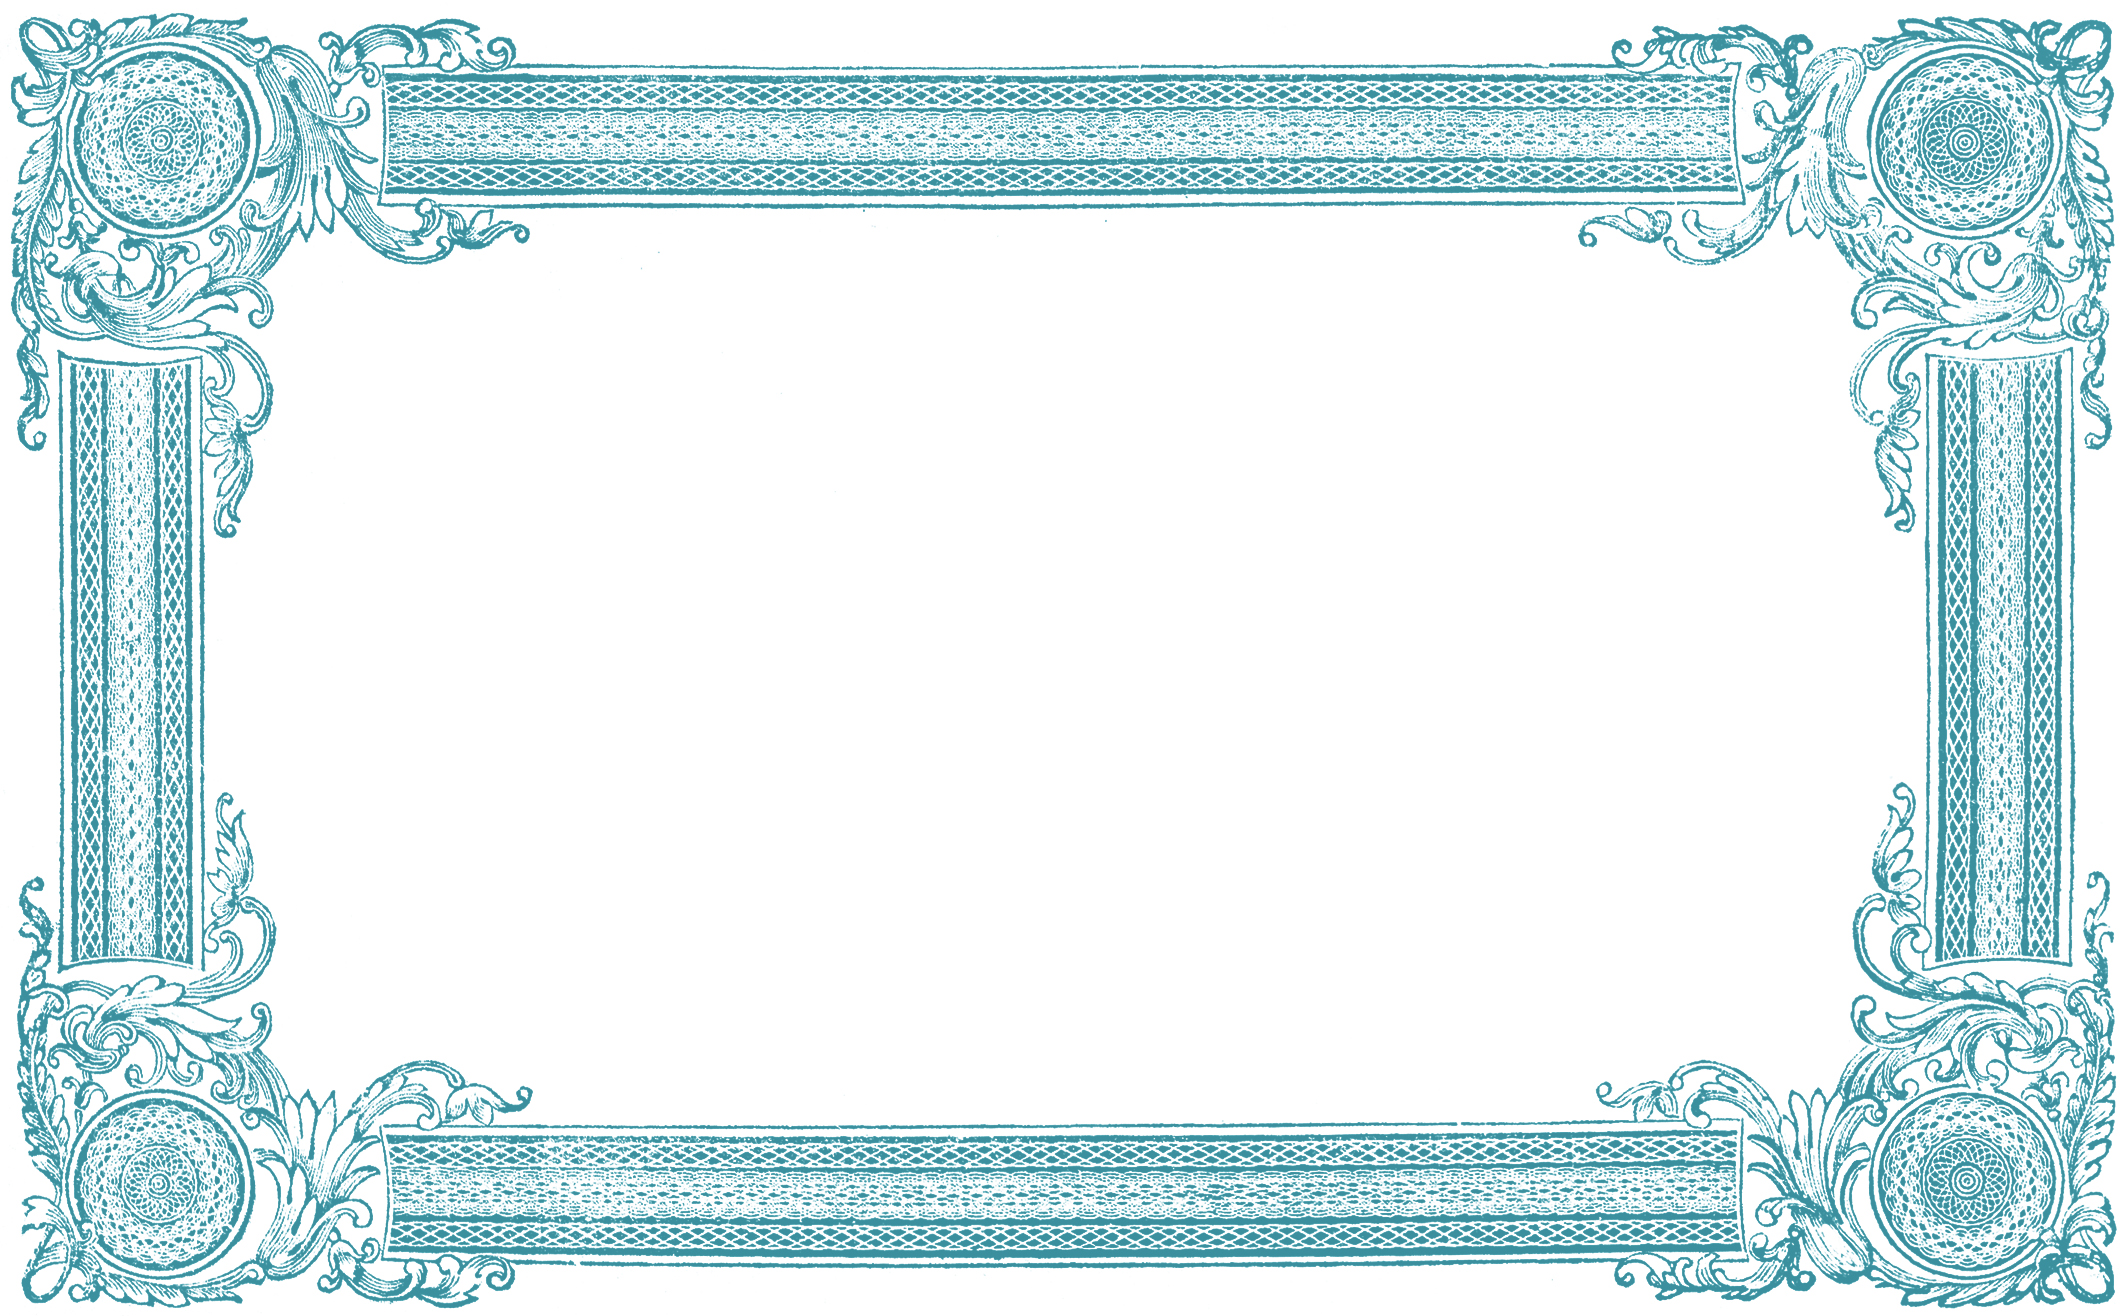 Free frame clip art images the graphics fairy